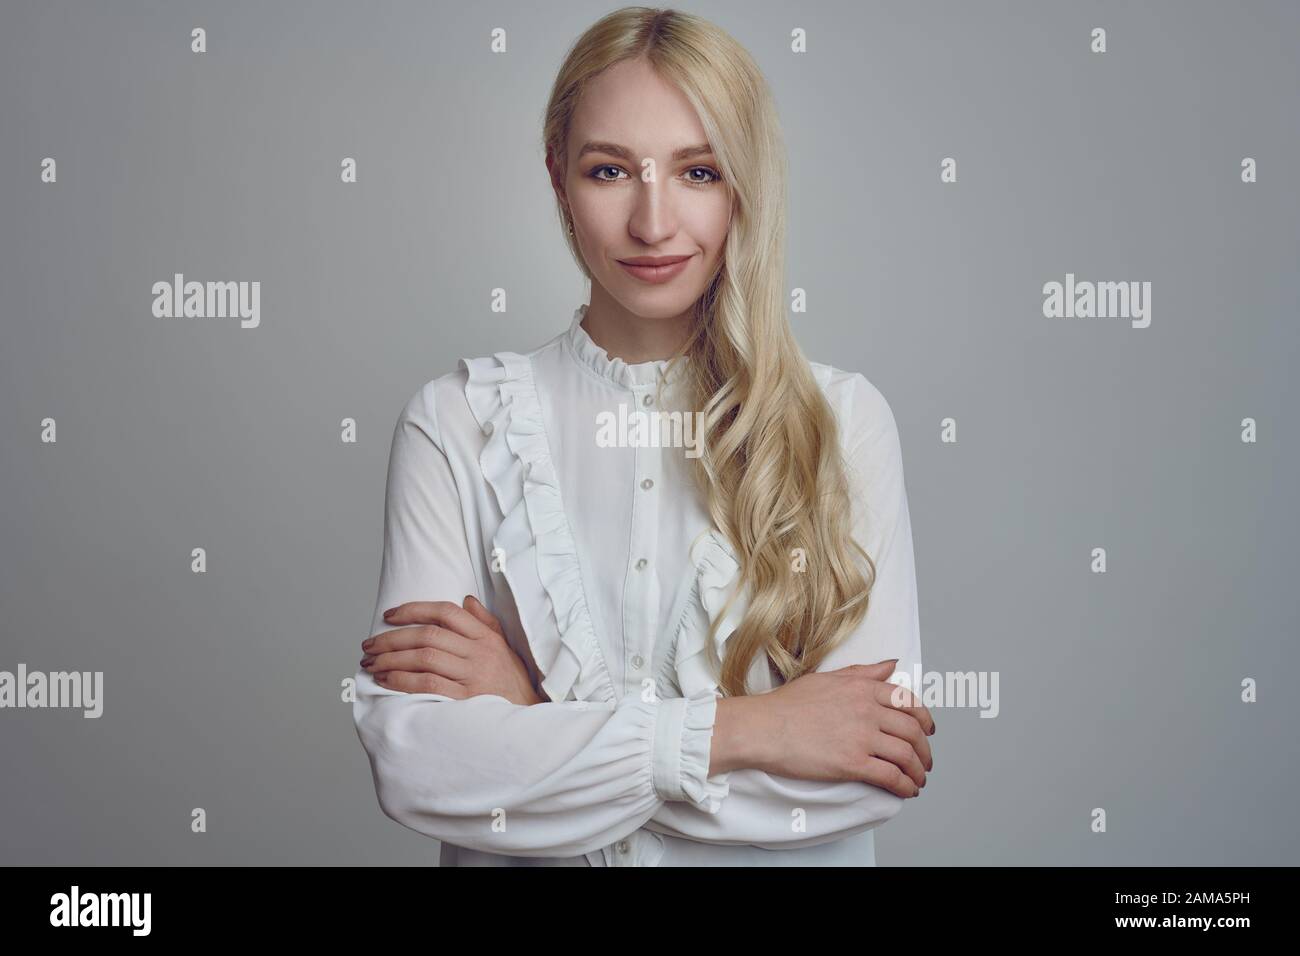 Young and beautiful long-haired blond woman in white blouse standing with her arms folded and looking at camera with a smirk. Front half-length portra Stock Photo